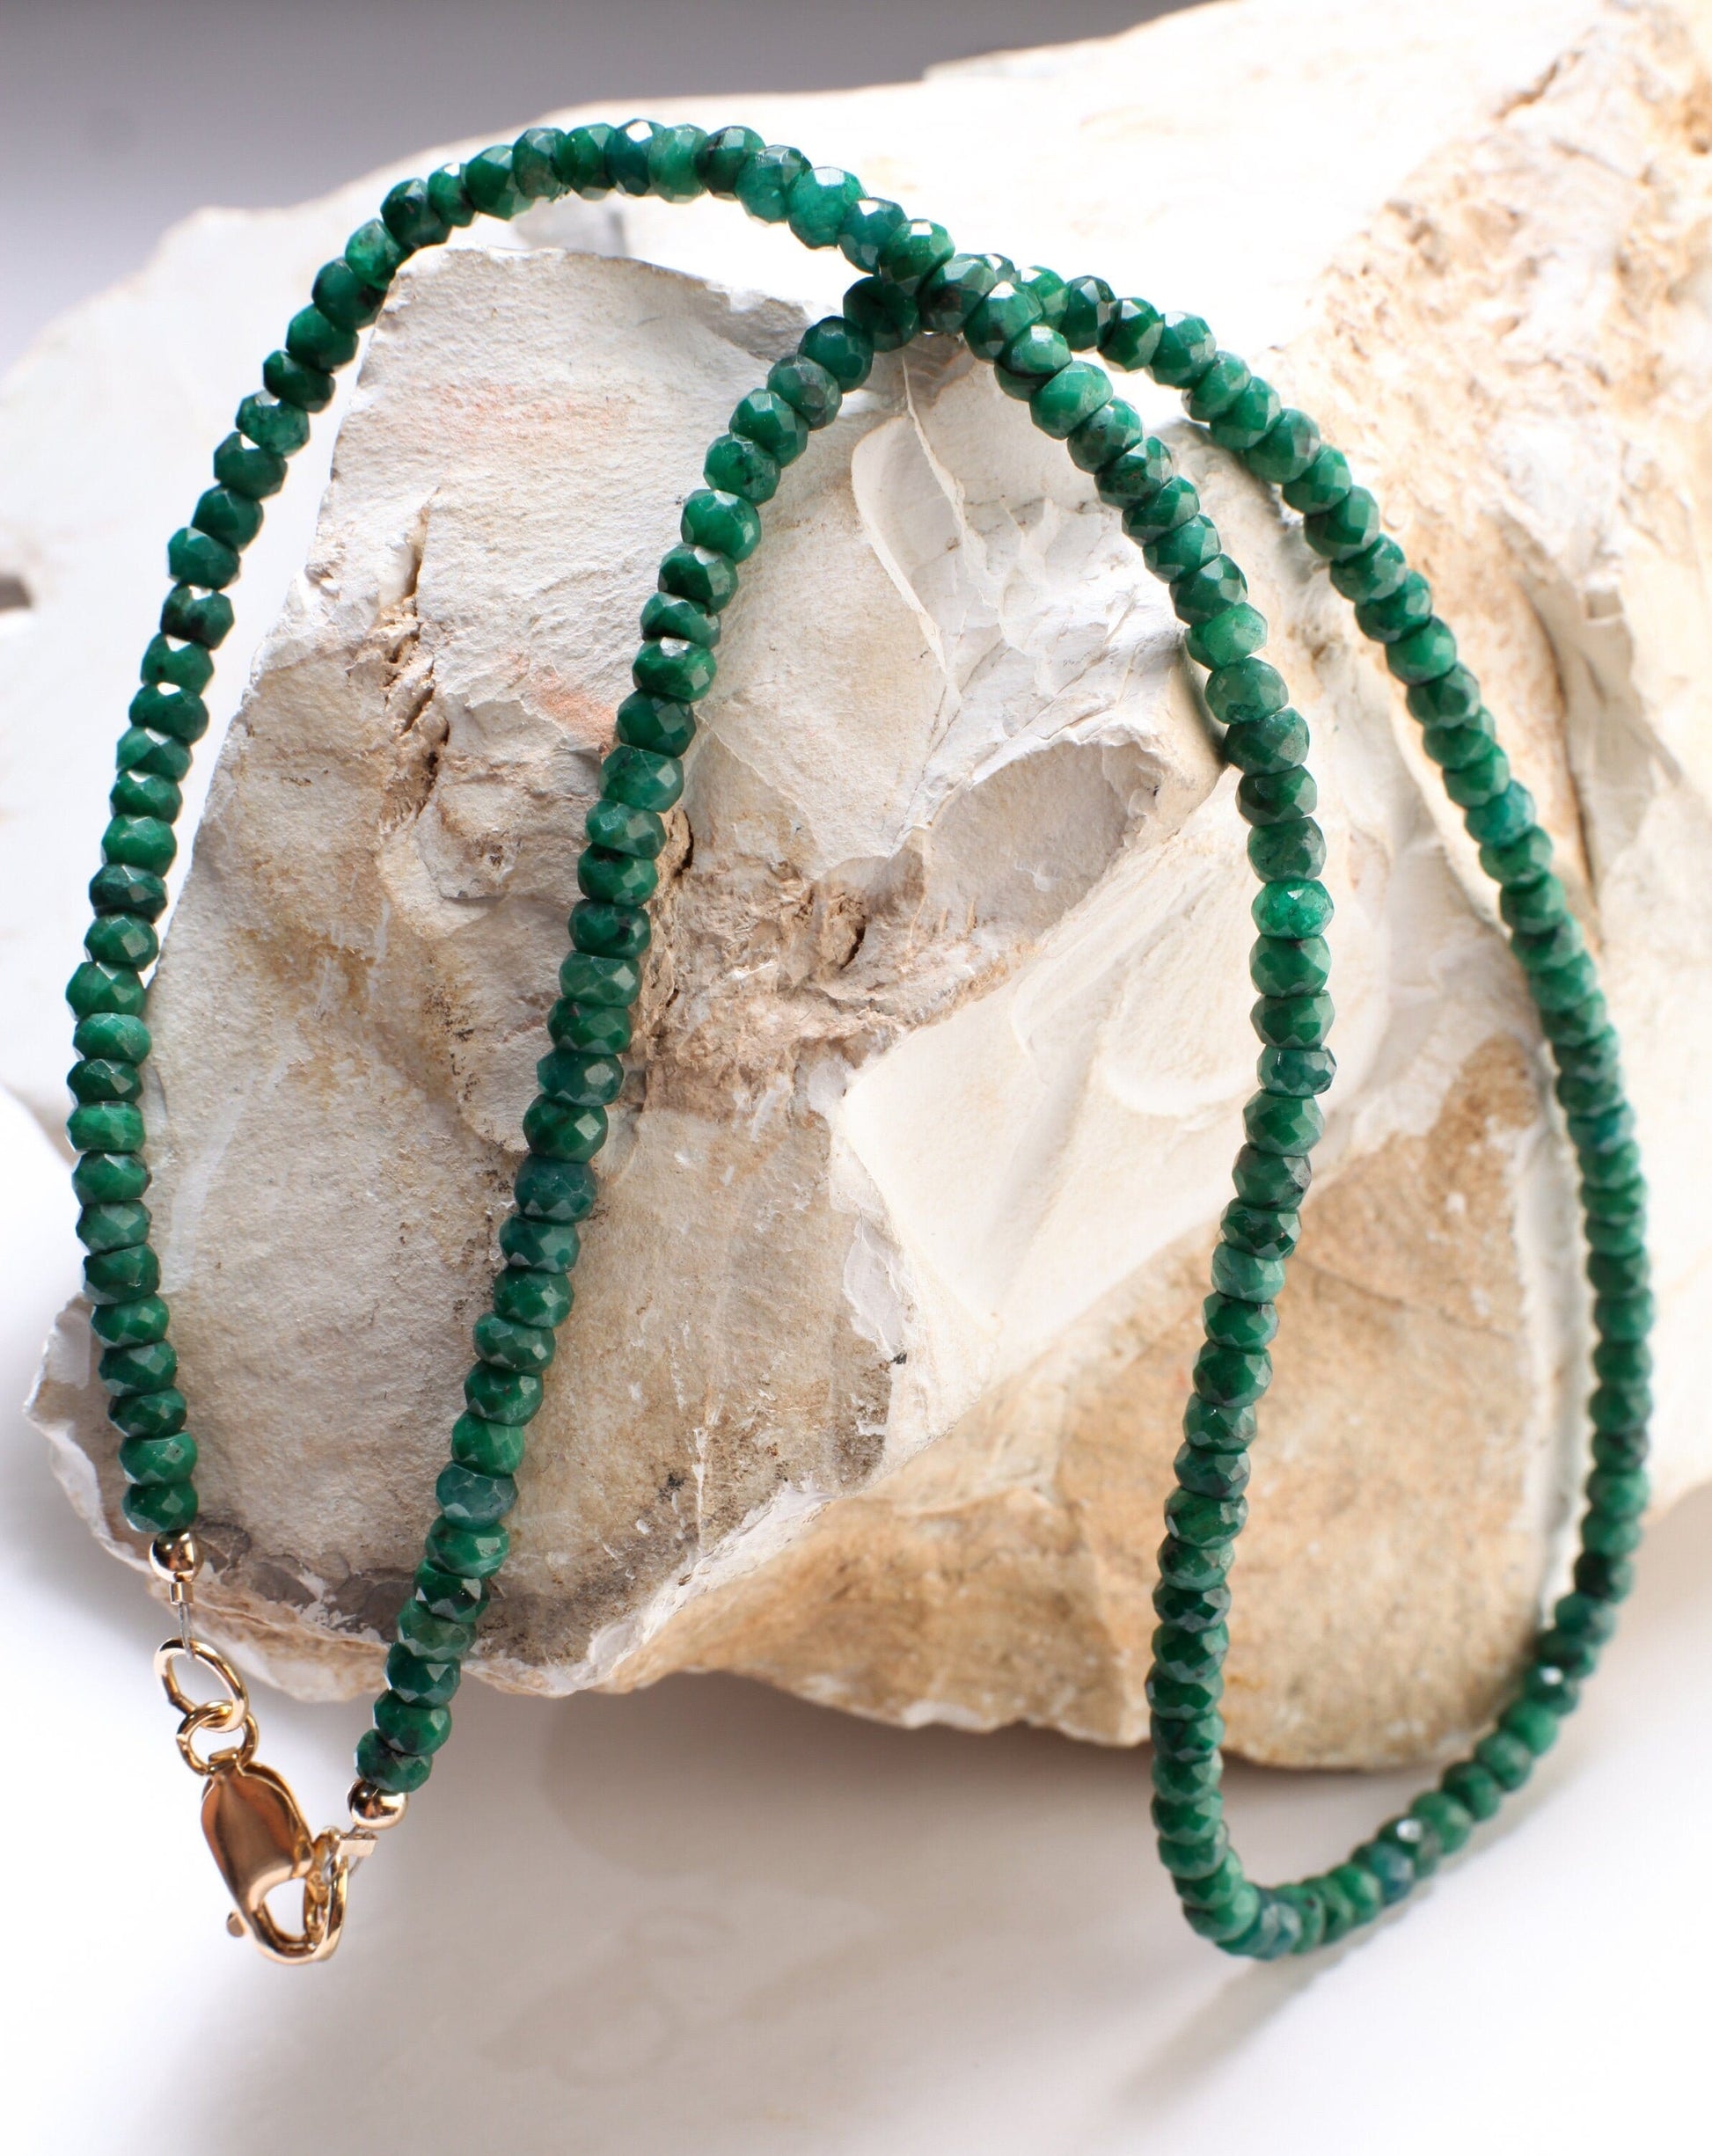 Emerald Necklace, Natural Zambian Emerald 4mm Faceted Roundel Gemstone Beads Necklace in 14k Gold filled